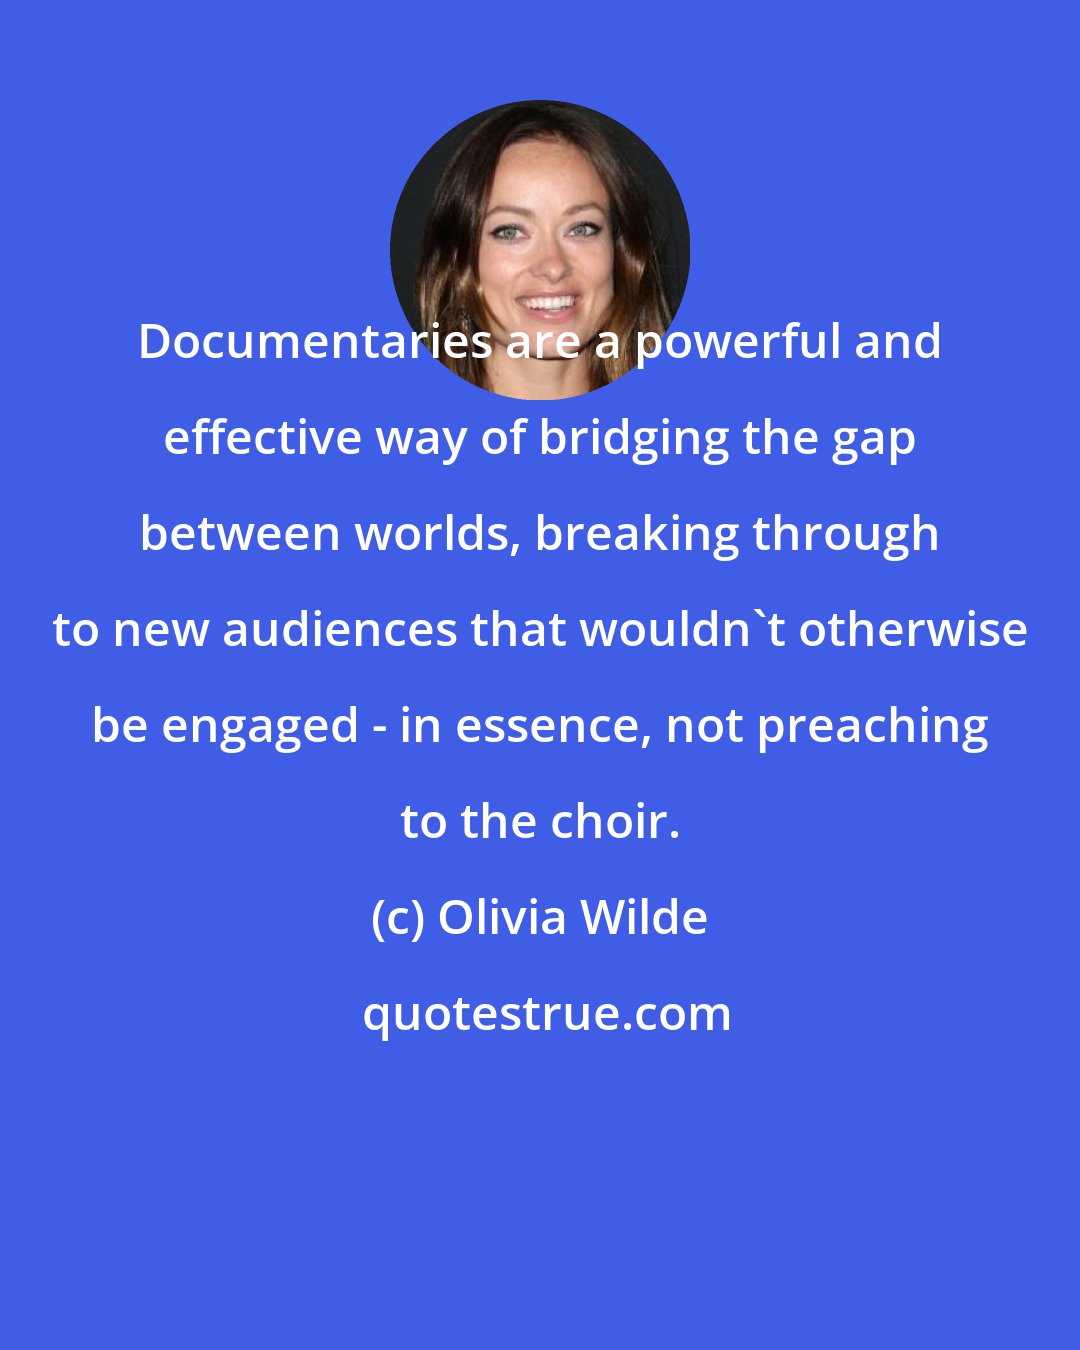 Olivia Wilde: Documentaries are a powerful and effective way of bridging the gap between worlds, breaking through to new audiences that wouldn't otherwise be engaged - in essence, not preaching to the choir.